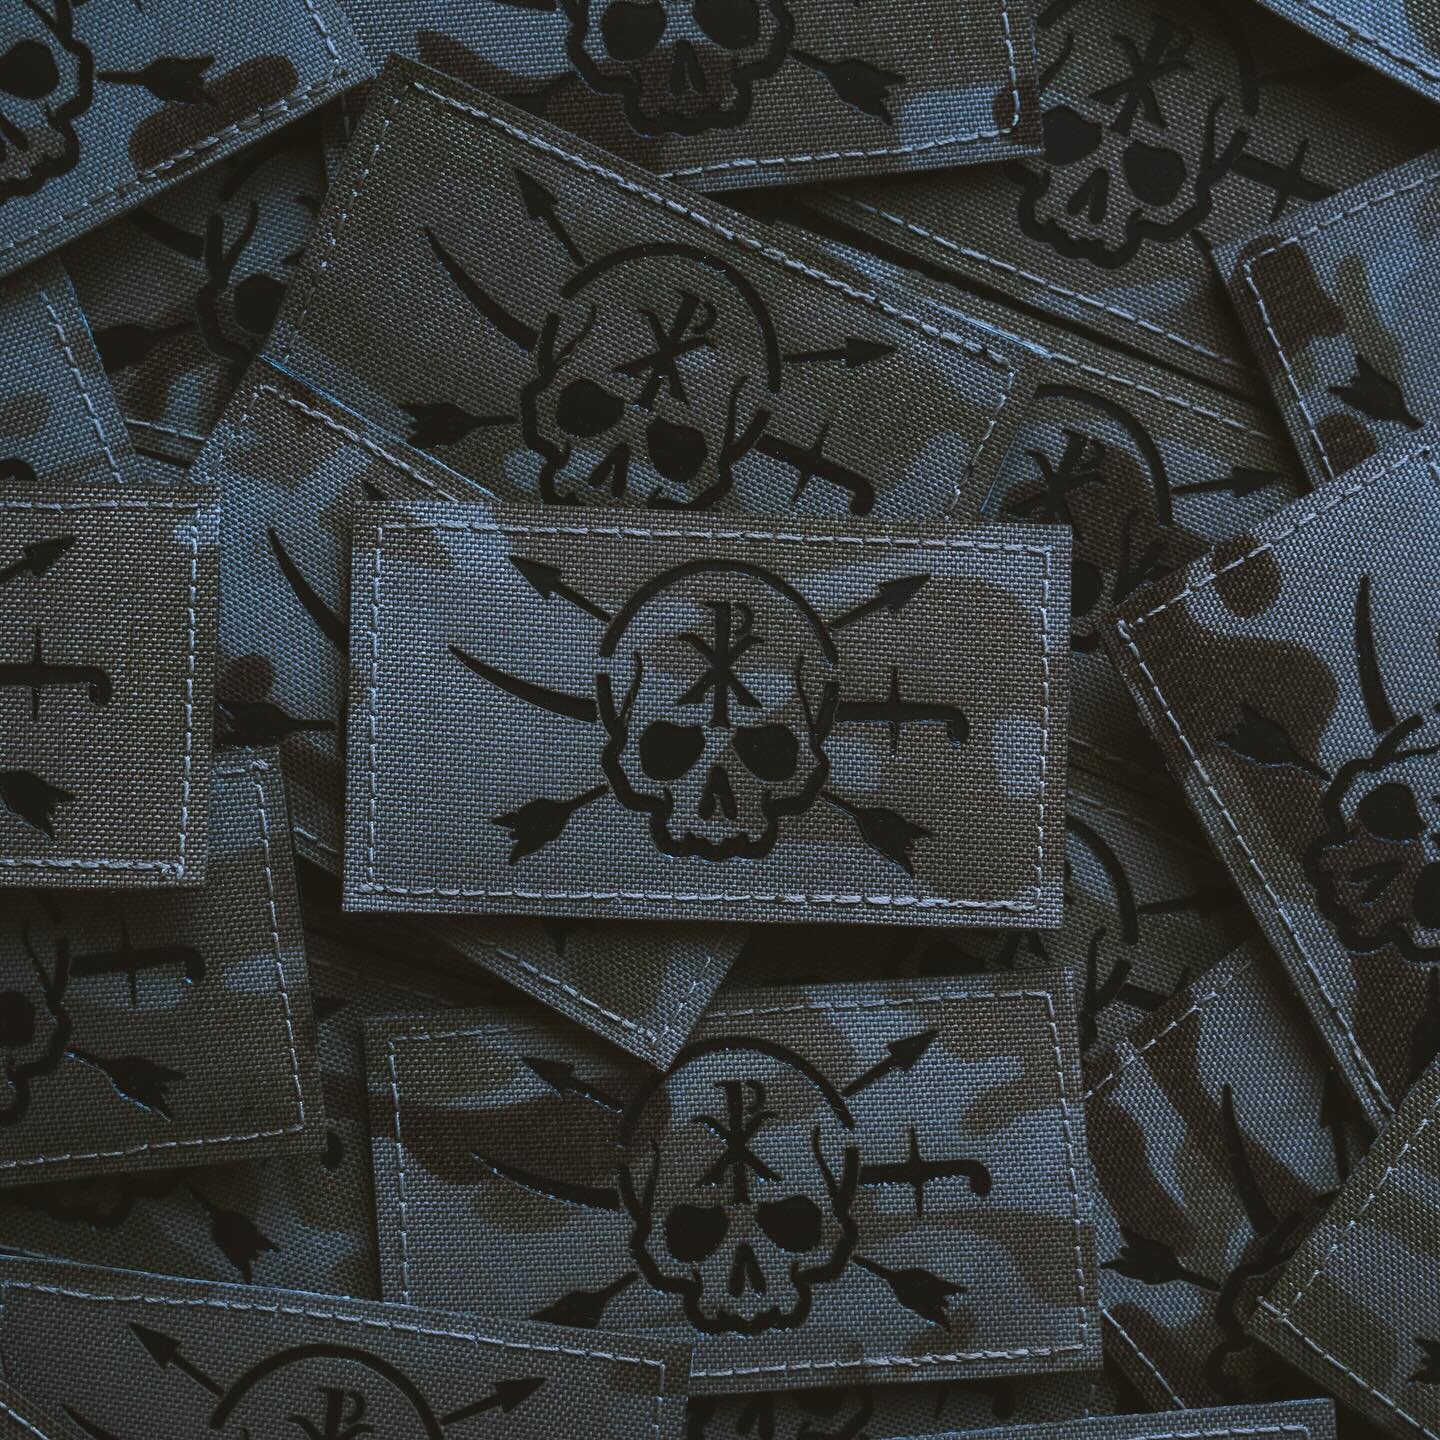 IR patches &amp; stickers drop Friday at 8pm cst. These are limited, not a preorder. GOODLUCK. #houseofwolves